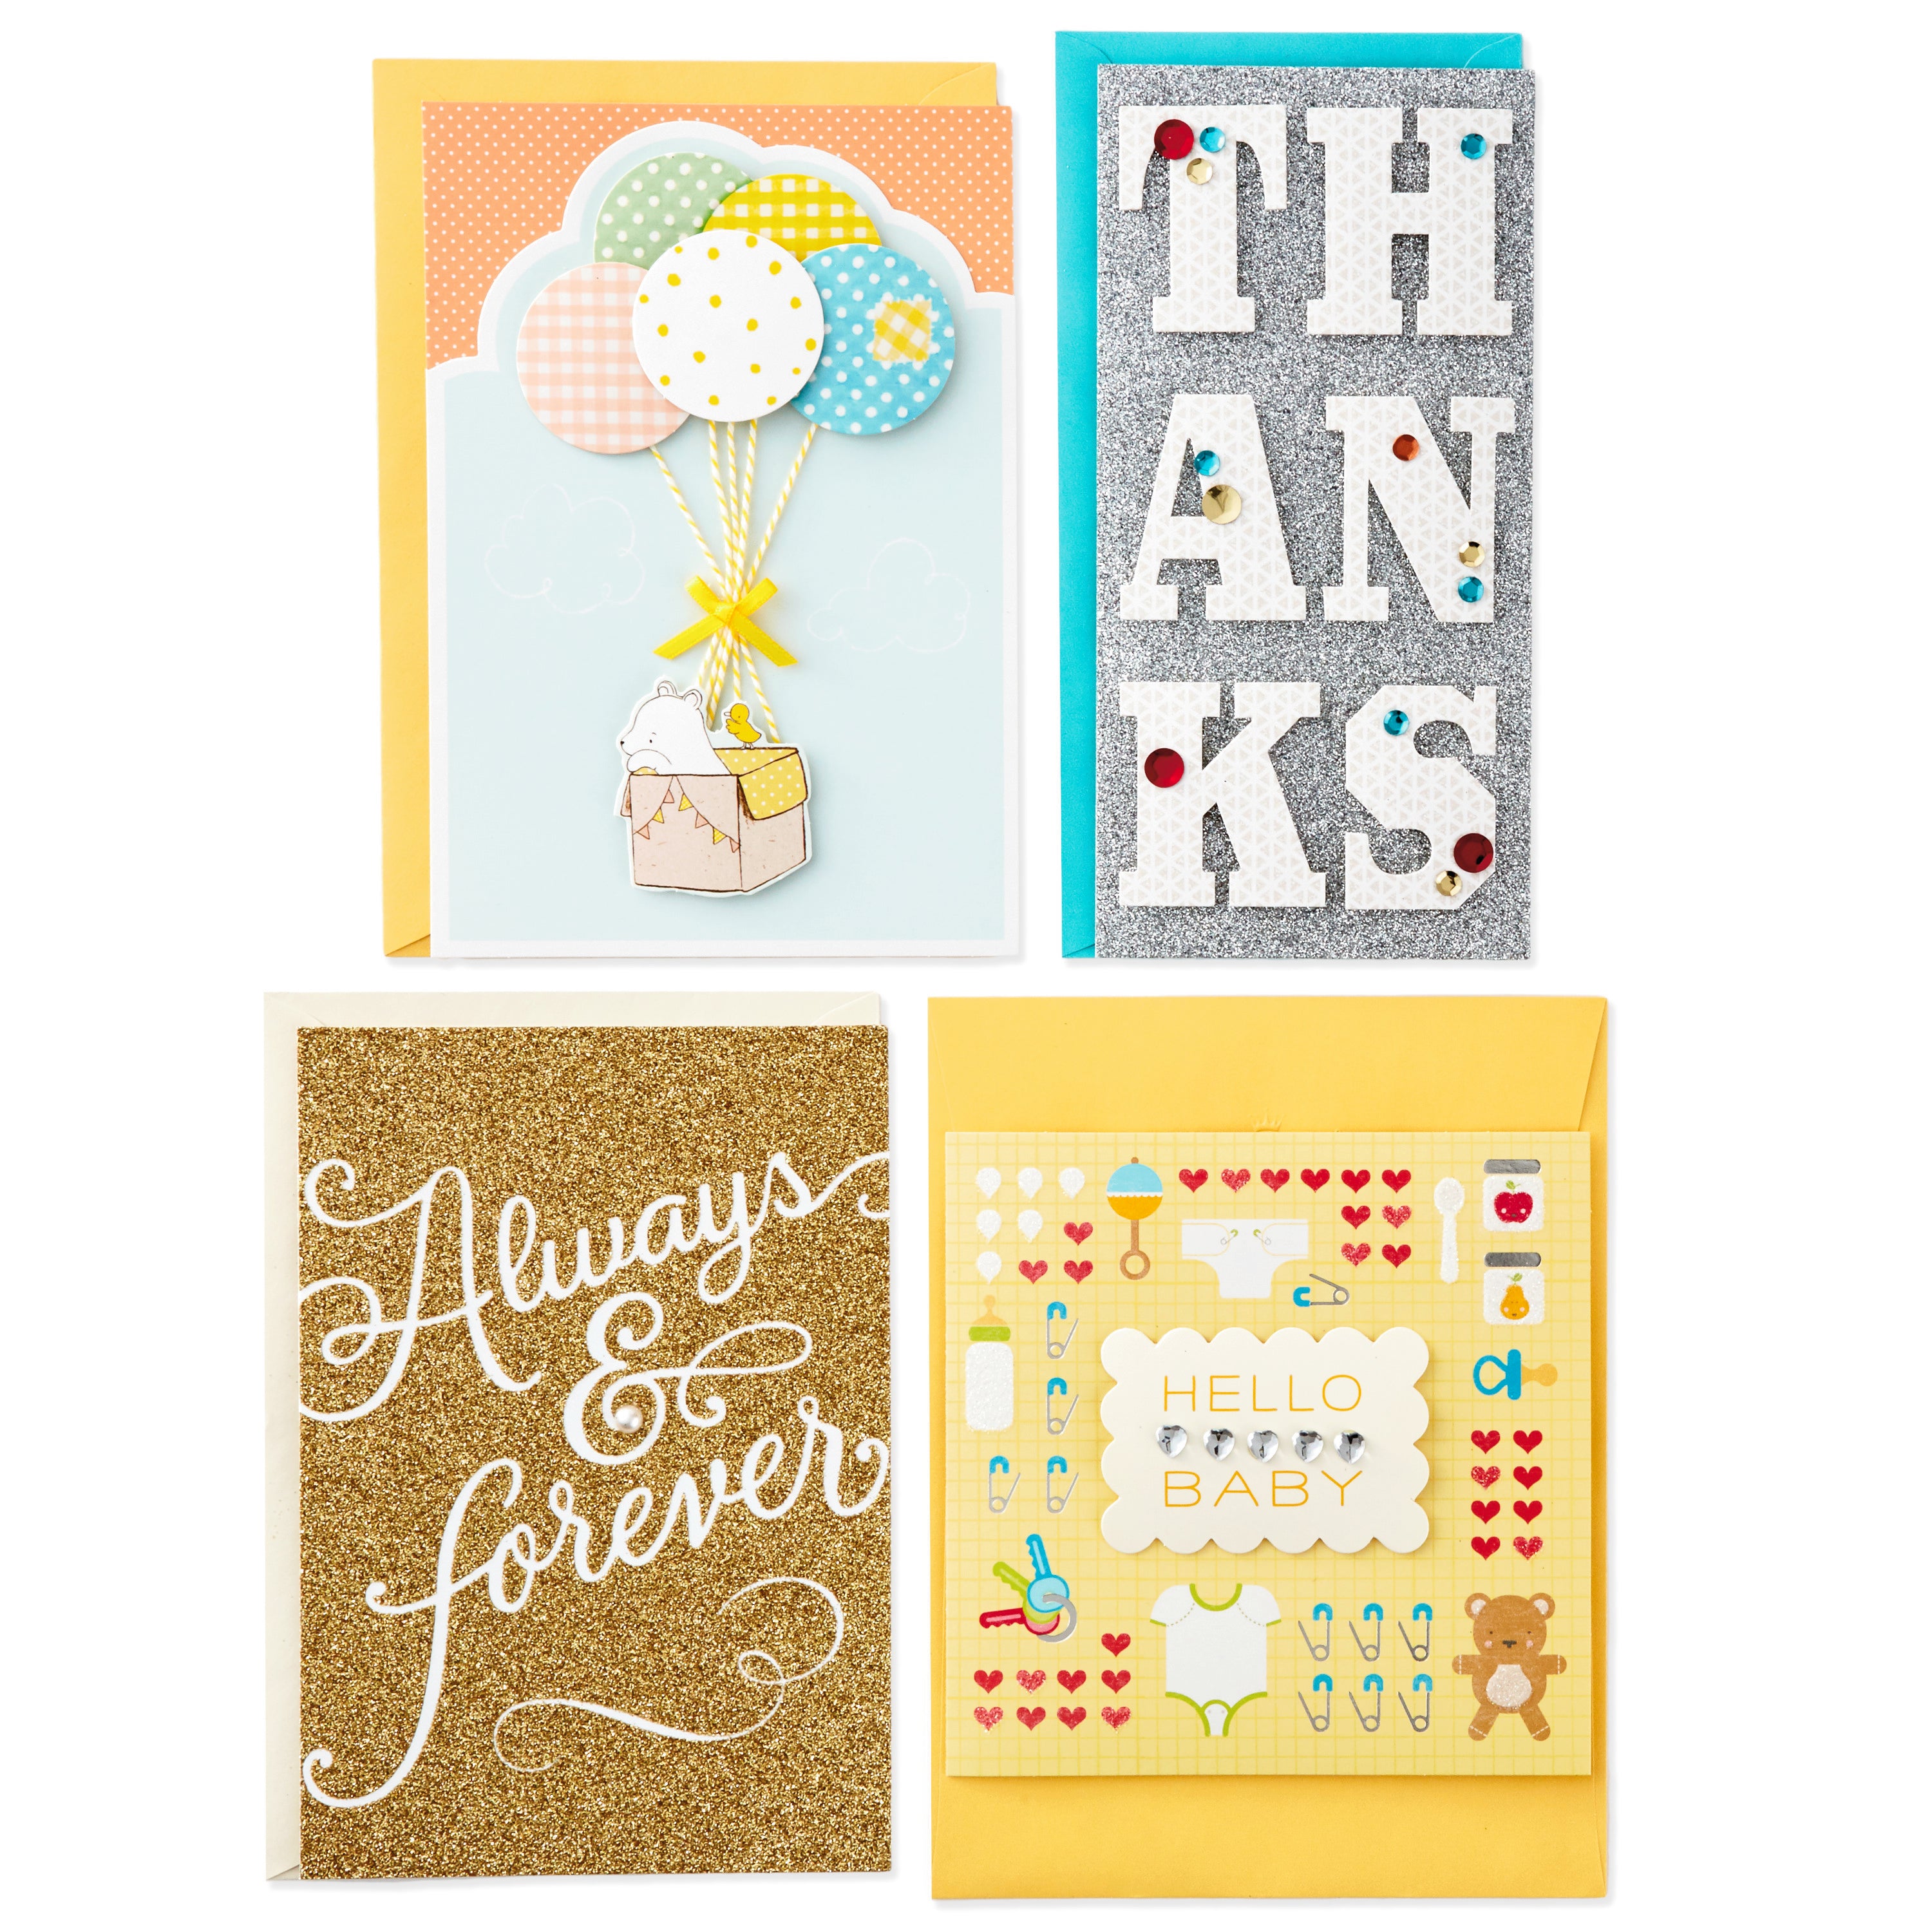 Browse All Greeting Card Assortment Boxes